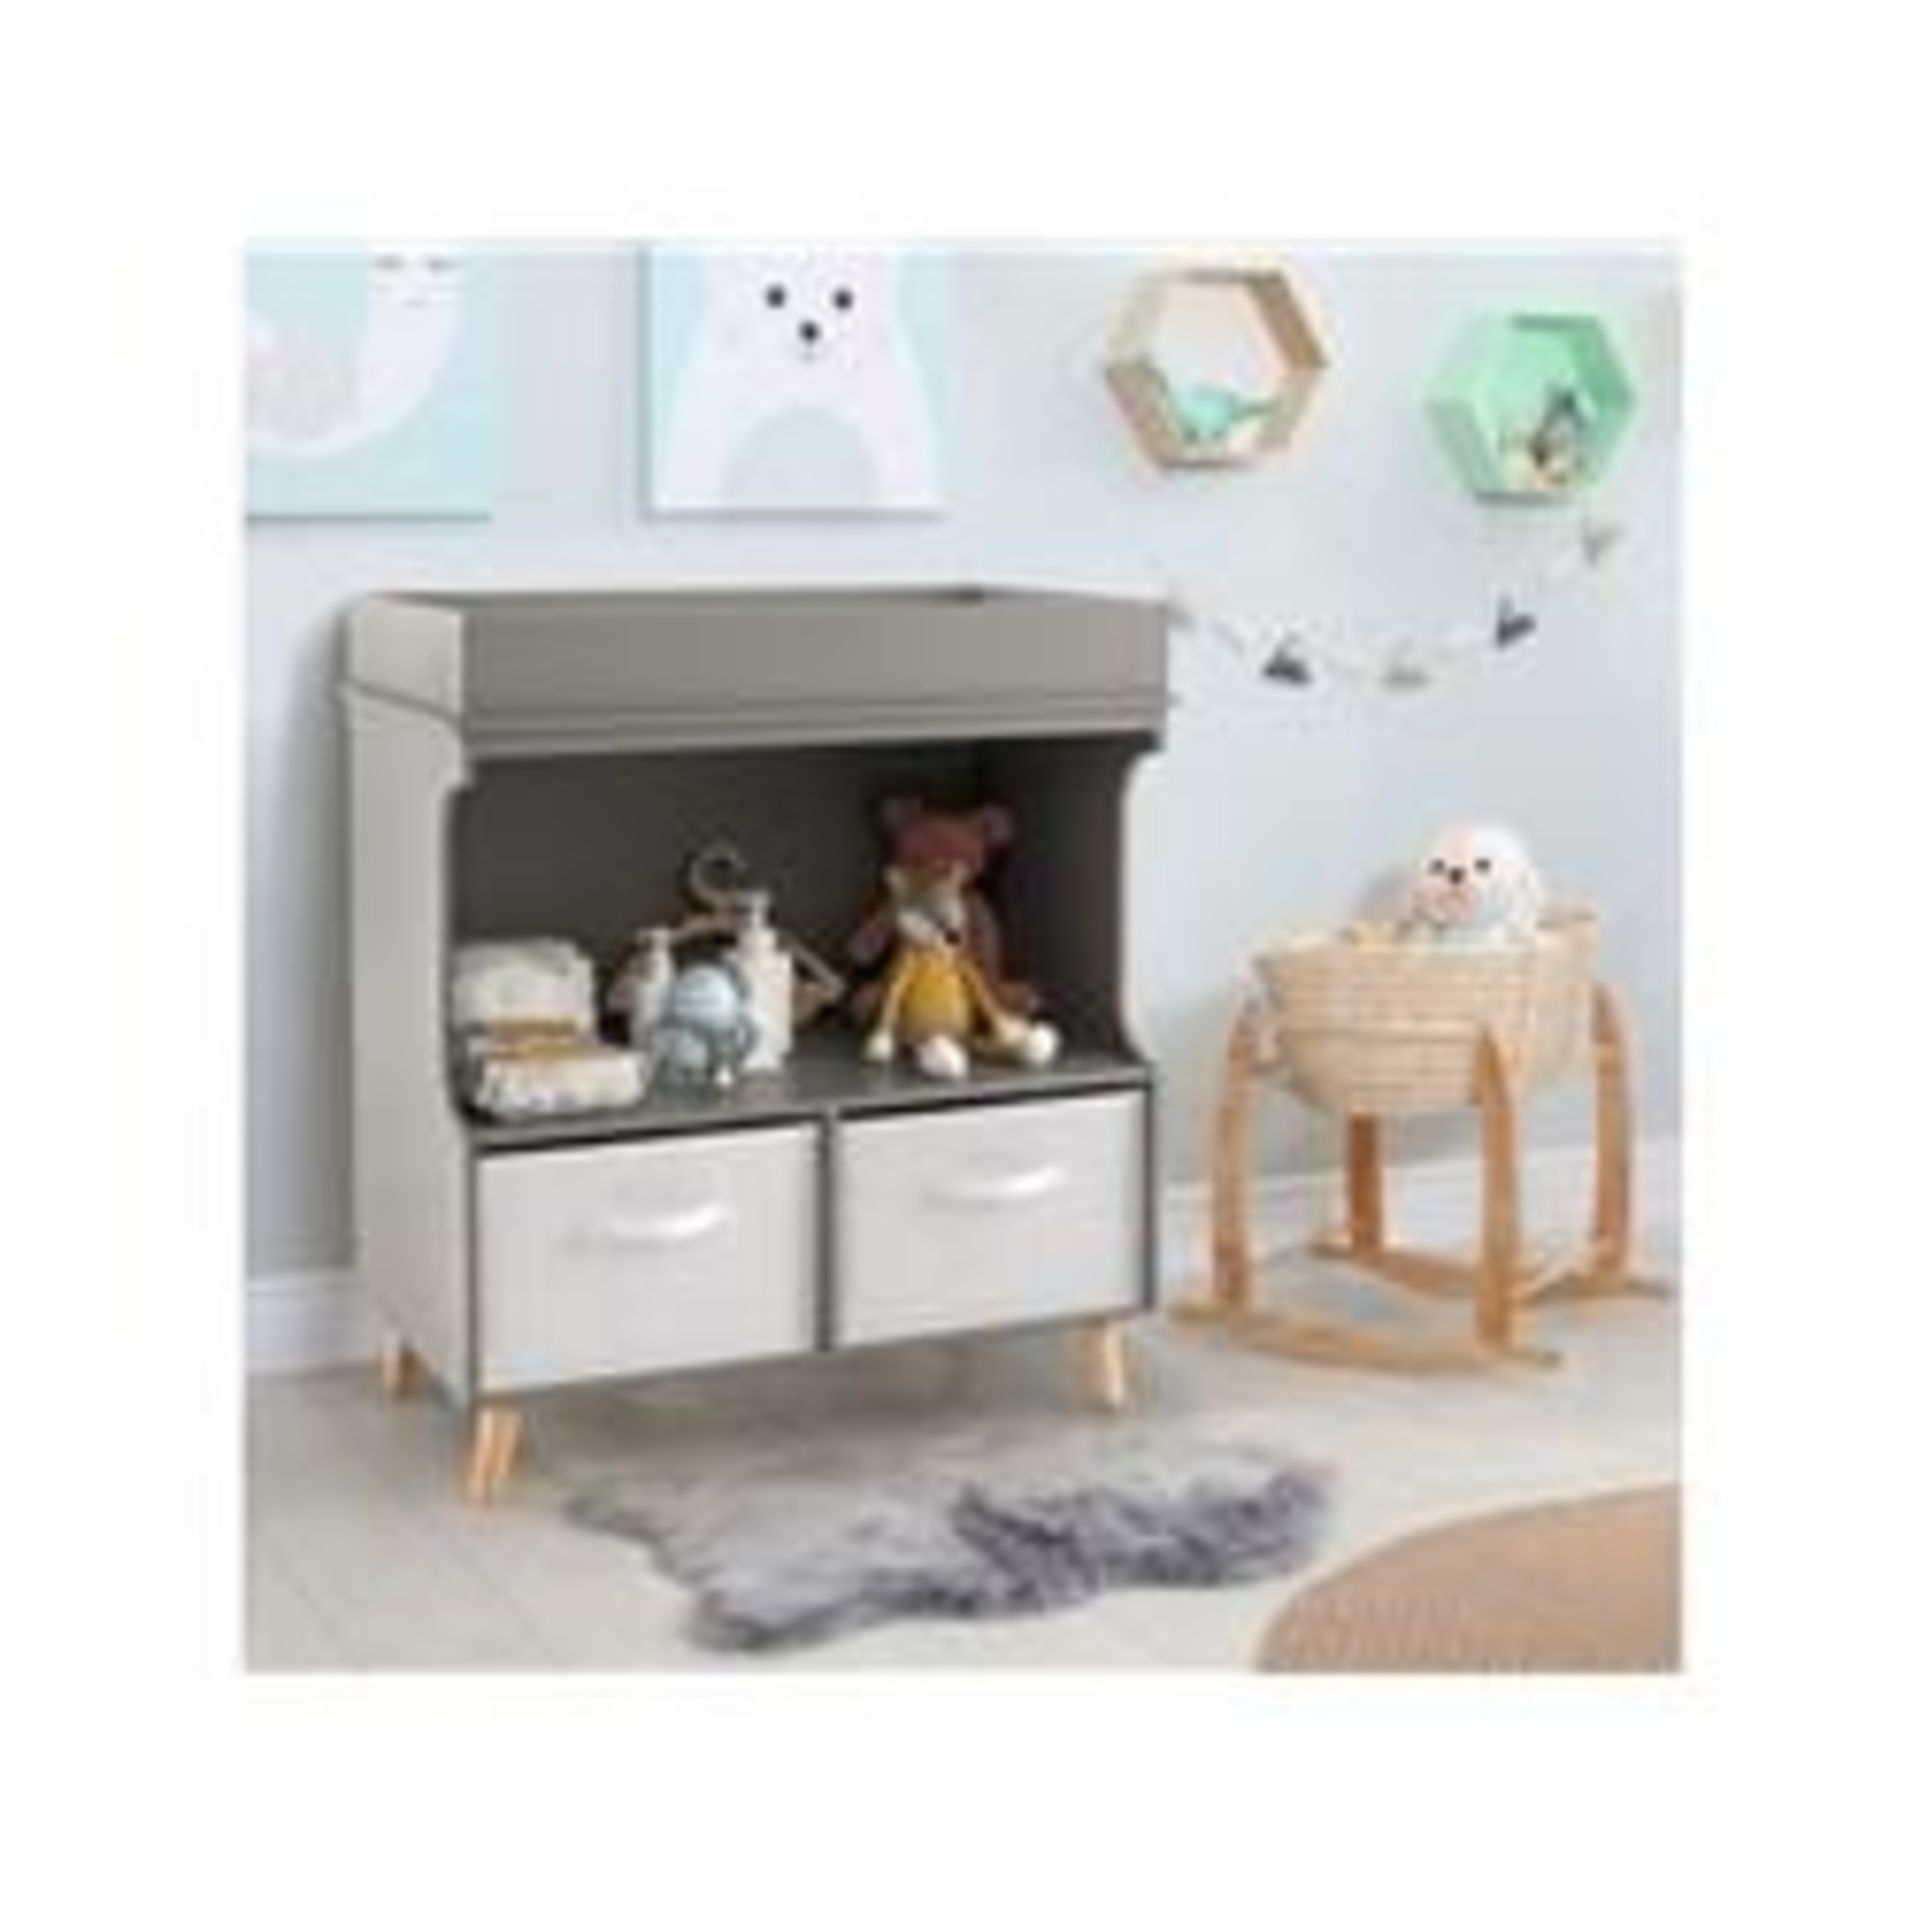 Baby Diaper Changing Station with Large Storage Capacity - ER54